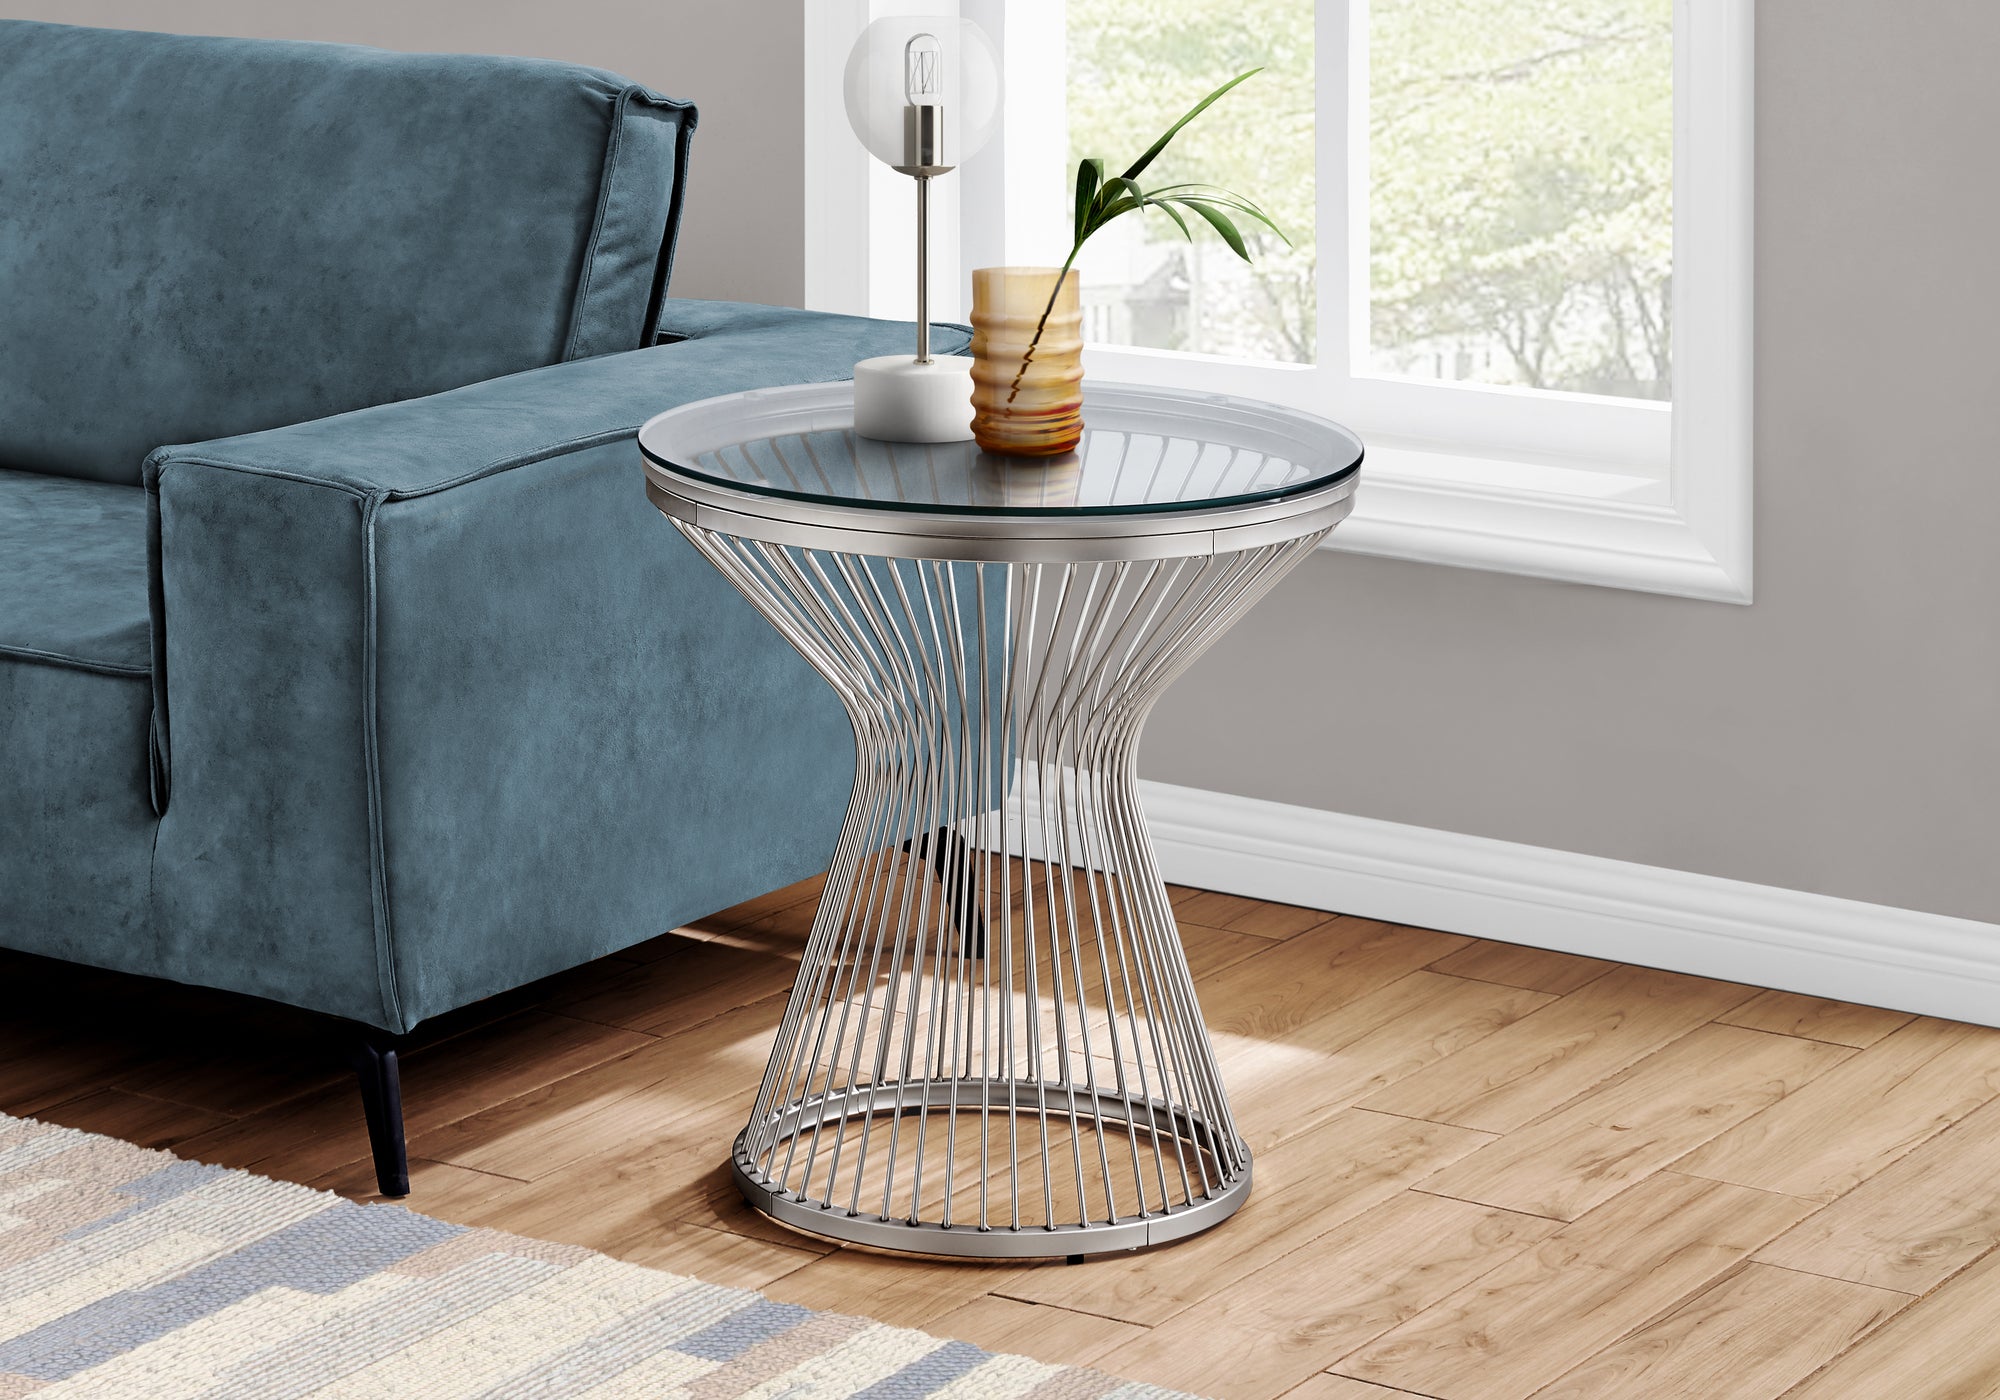 MN-467821    Accent Table, Side, End, Nightstand, Lamp, Living Room, Bedroom, Metal Base, Tempered Glass, Clear, Stainless Steel, Contemporary, Glam, Modern